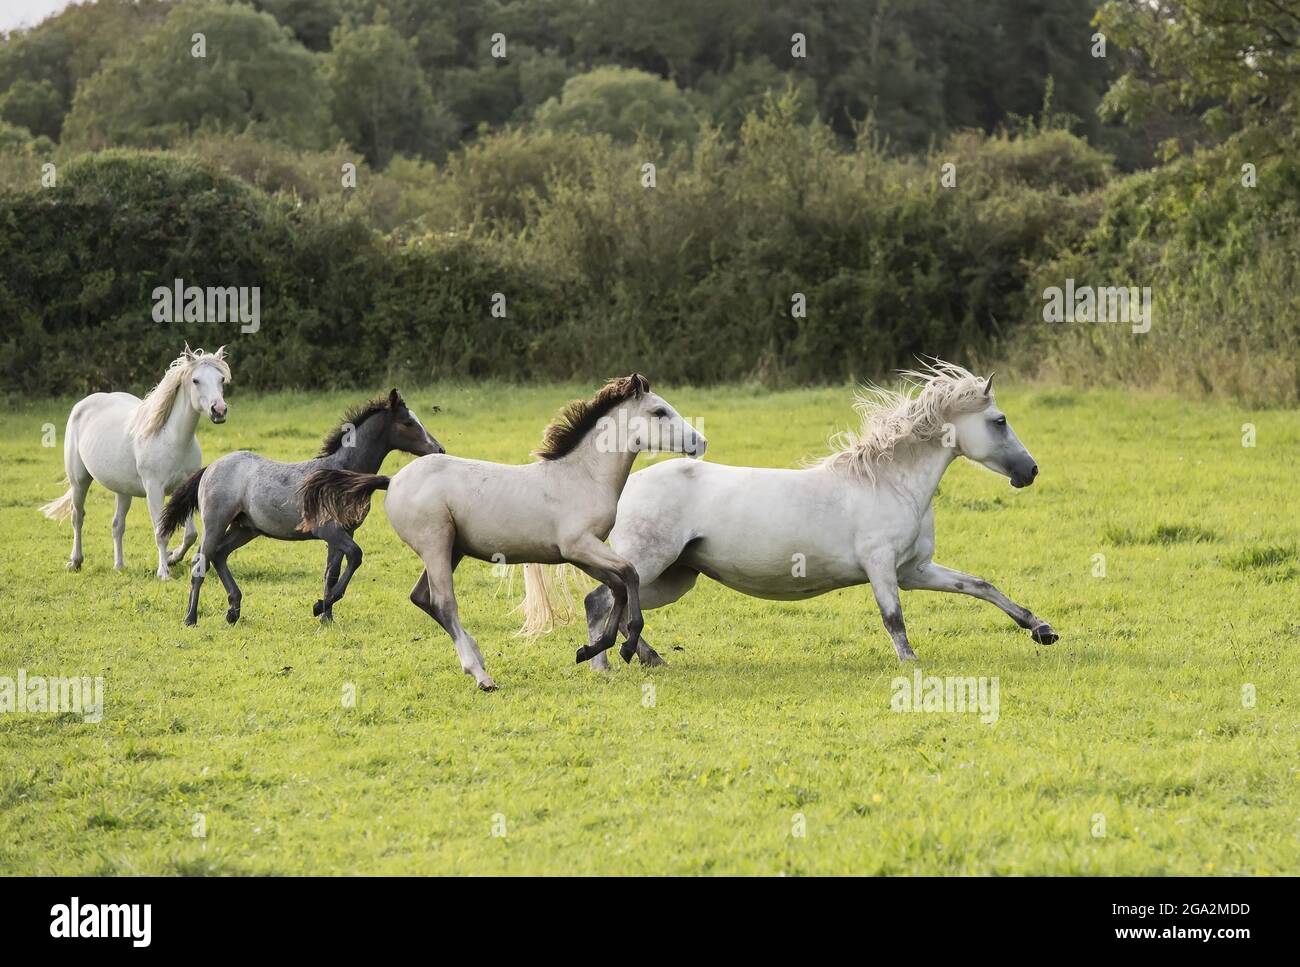 Horses (Equus ferus caballus) galloping in a grassy field; Menlo, County Galway, Ireland Stock Photo